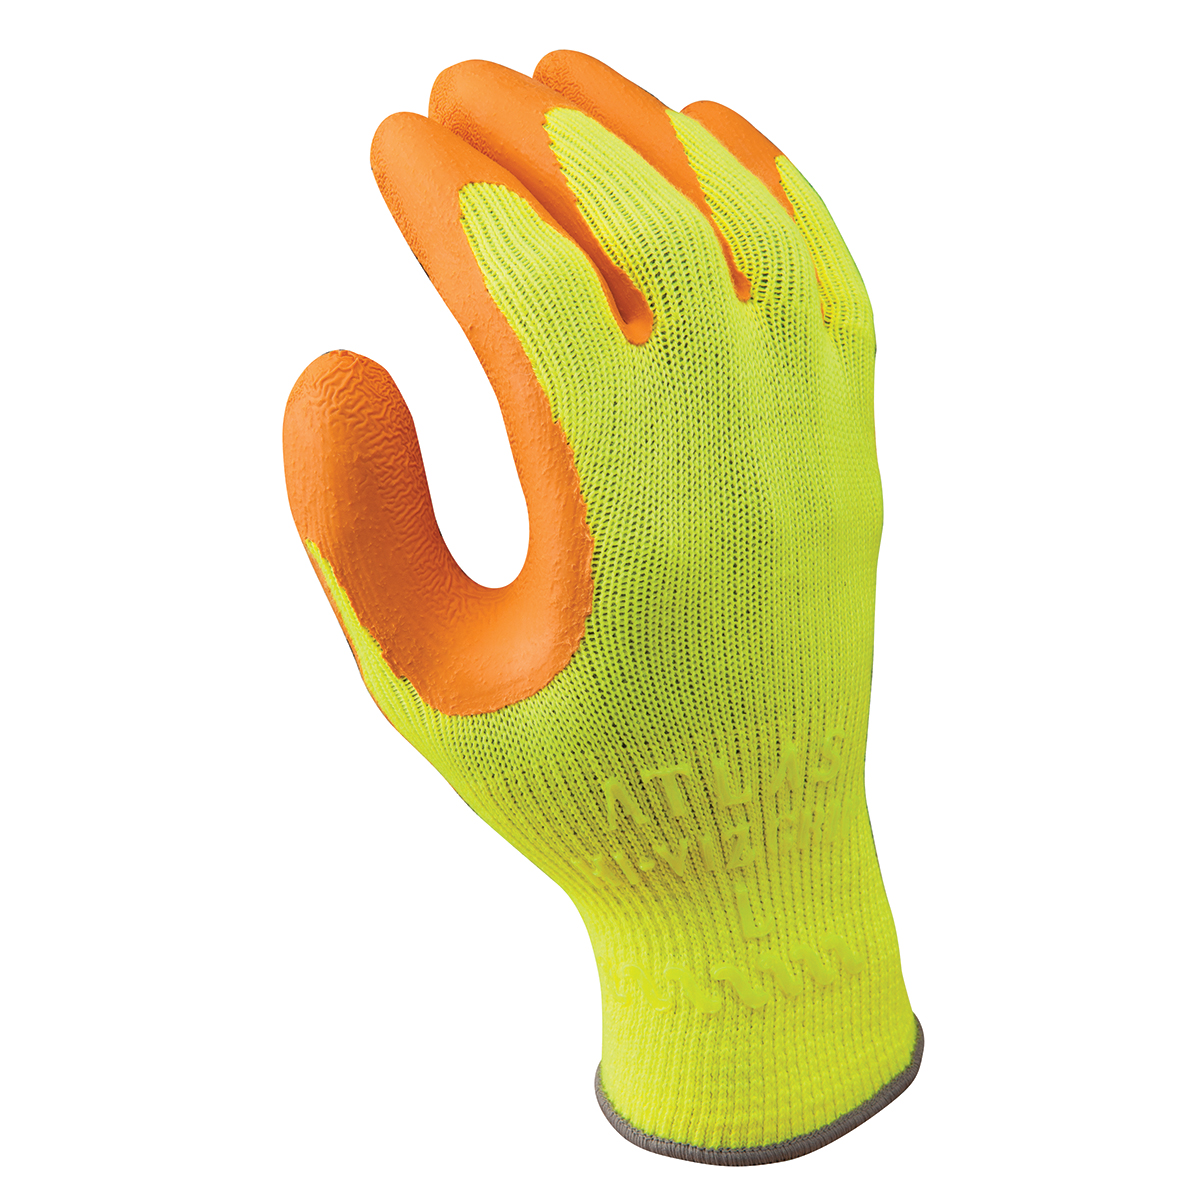 300NB-8 Global Glove 300NB Gripster Gloves, Neon Yellow, Black Etched  Rubber Palm, Medium, 12PK [GGS-300NB-08] : Coated Gloves - $30.71 EMI  Supply, Inc